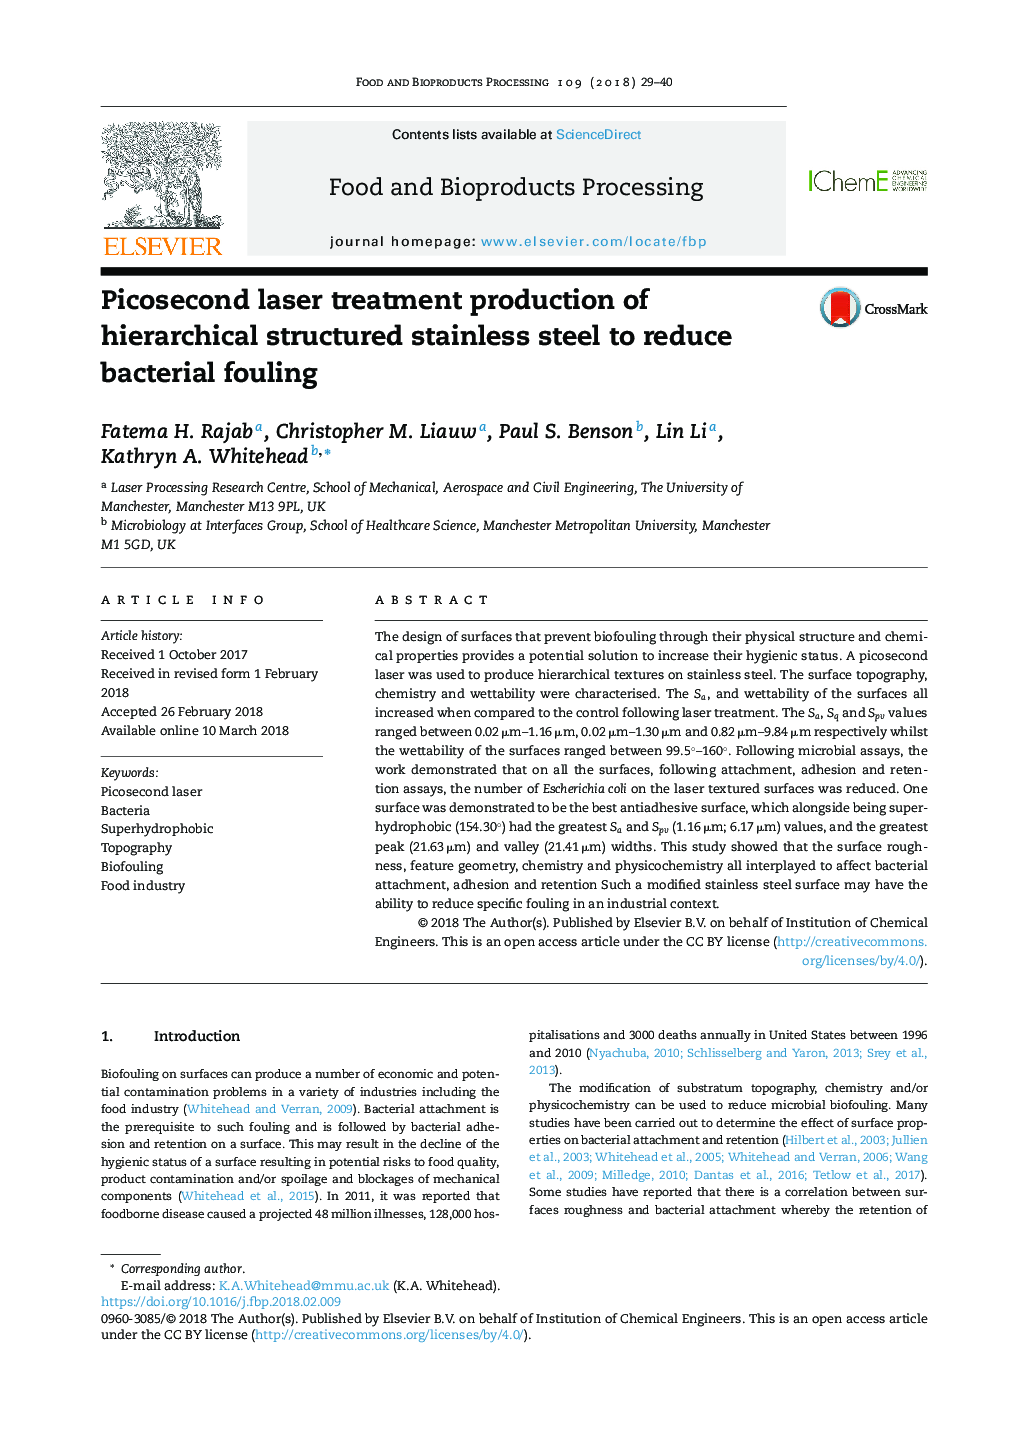 Picosecond laser treatment production of hierarchical structured stainless steel to reduce bacterial fouling